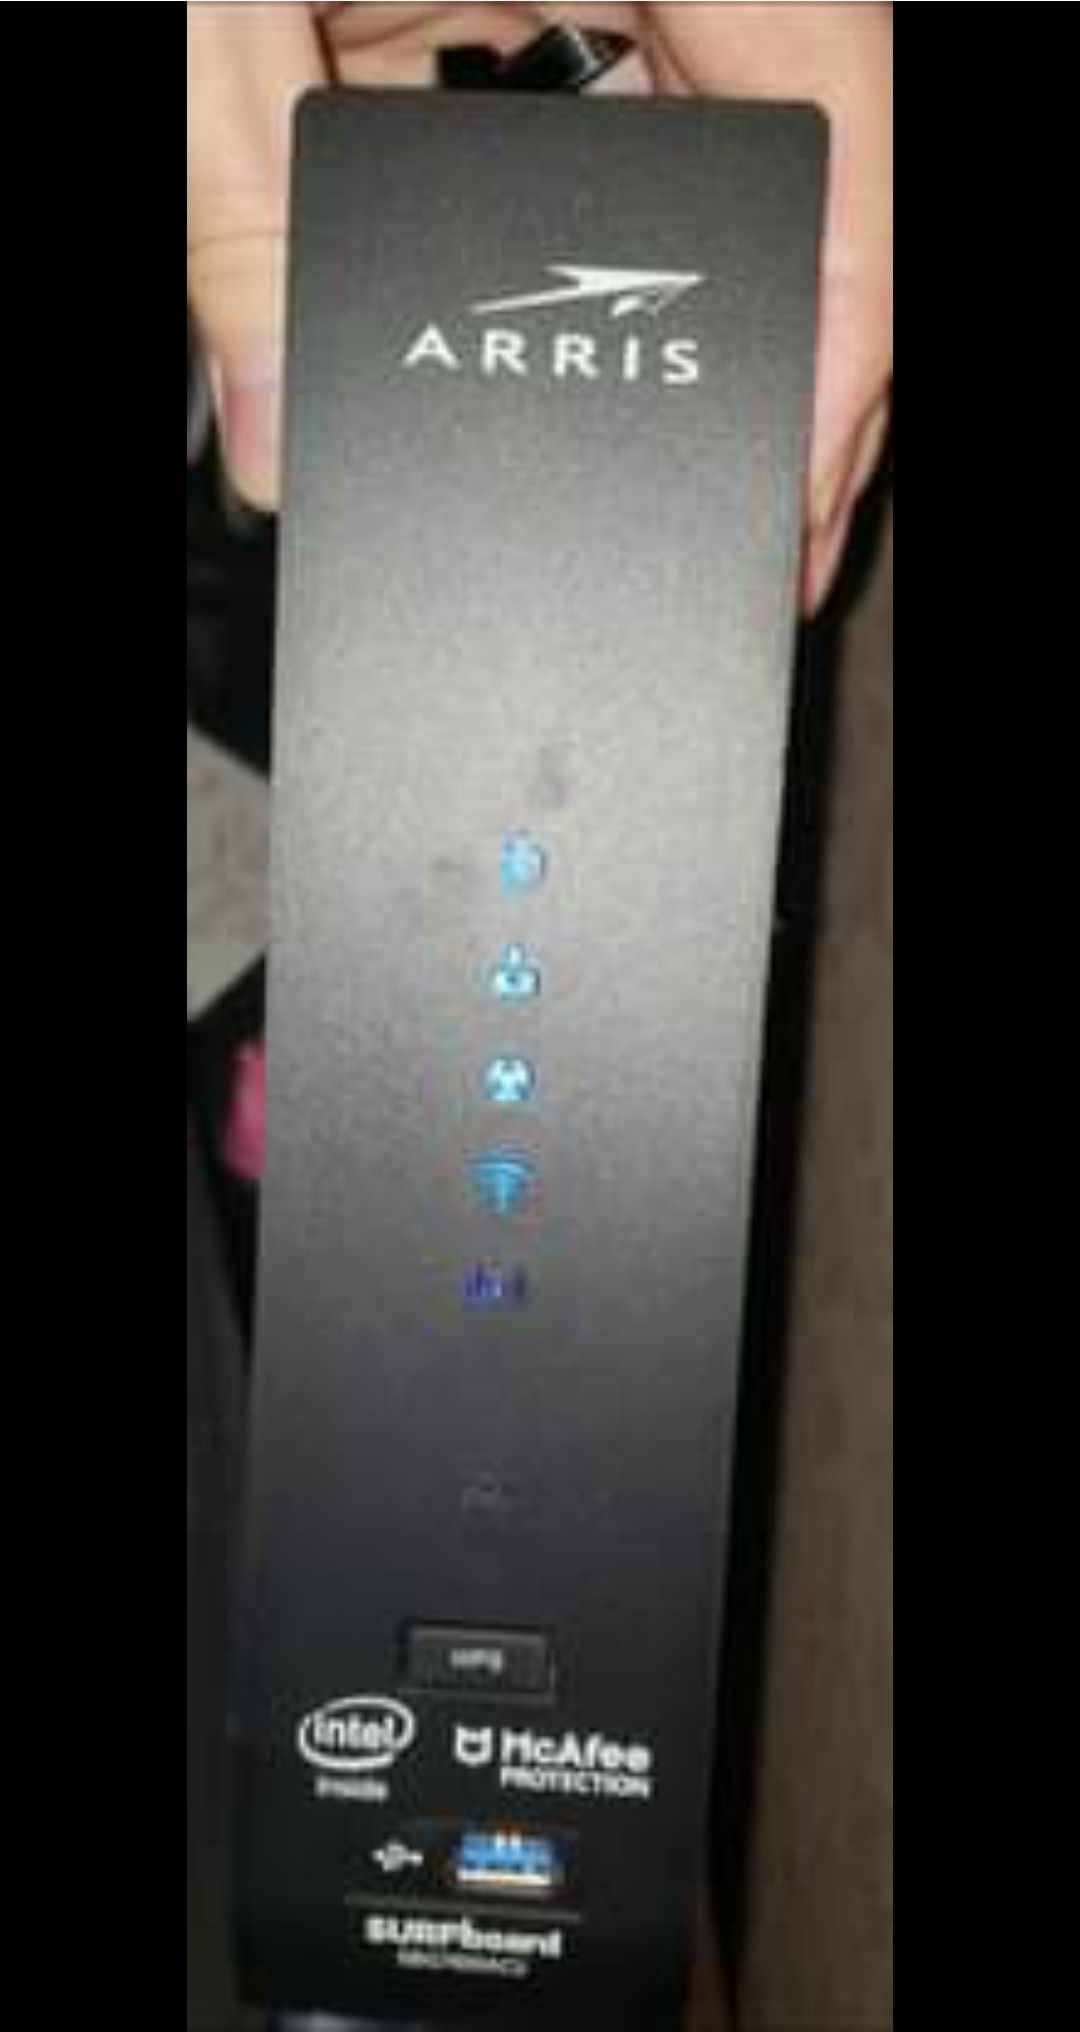 arris surfboard sbg7600ac2 modem and router